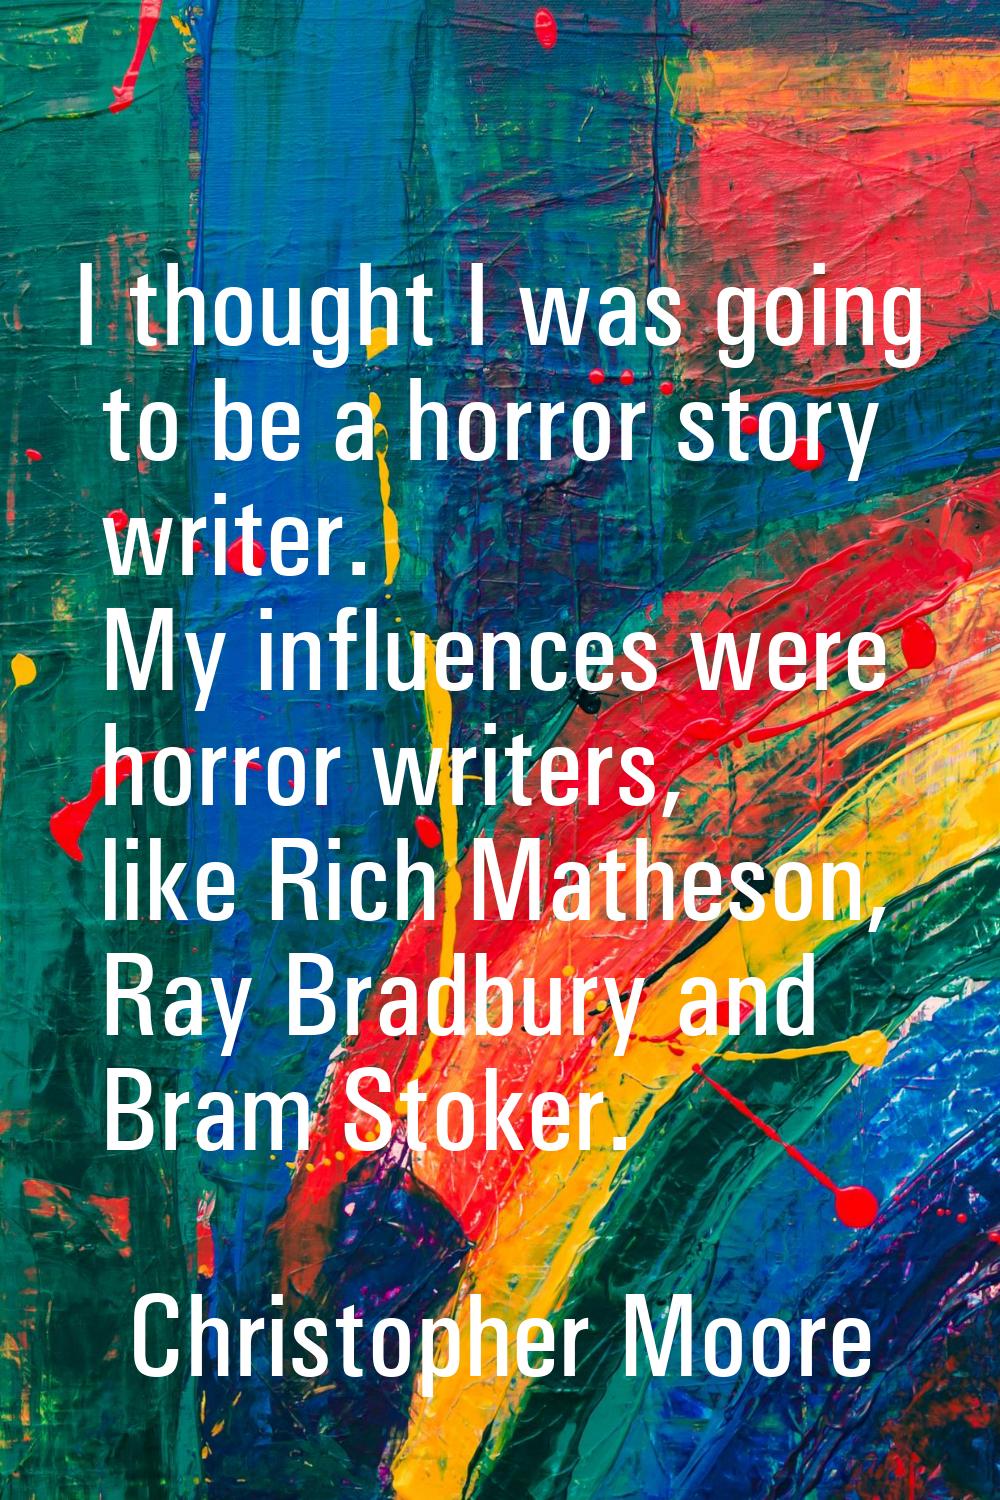 I thought I was going to be a horror story writer. My influences were horror writers, like Rich Mat